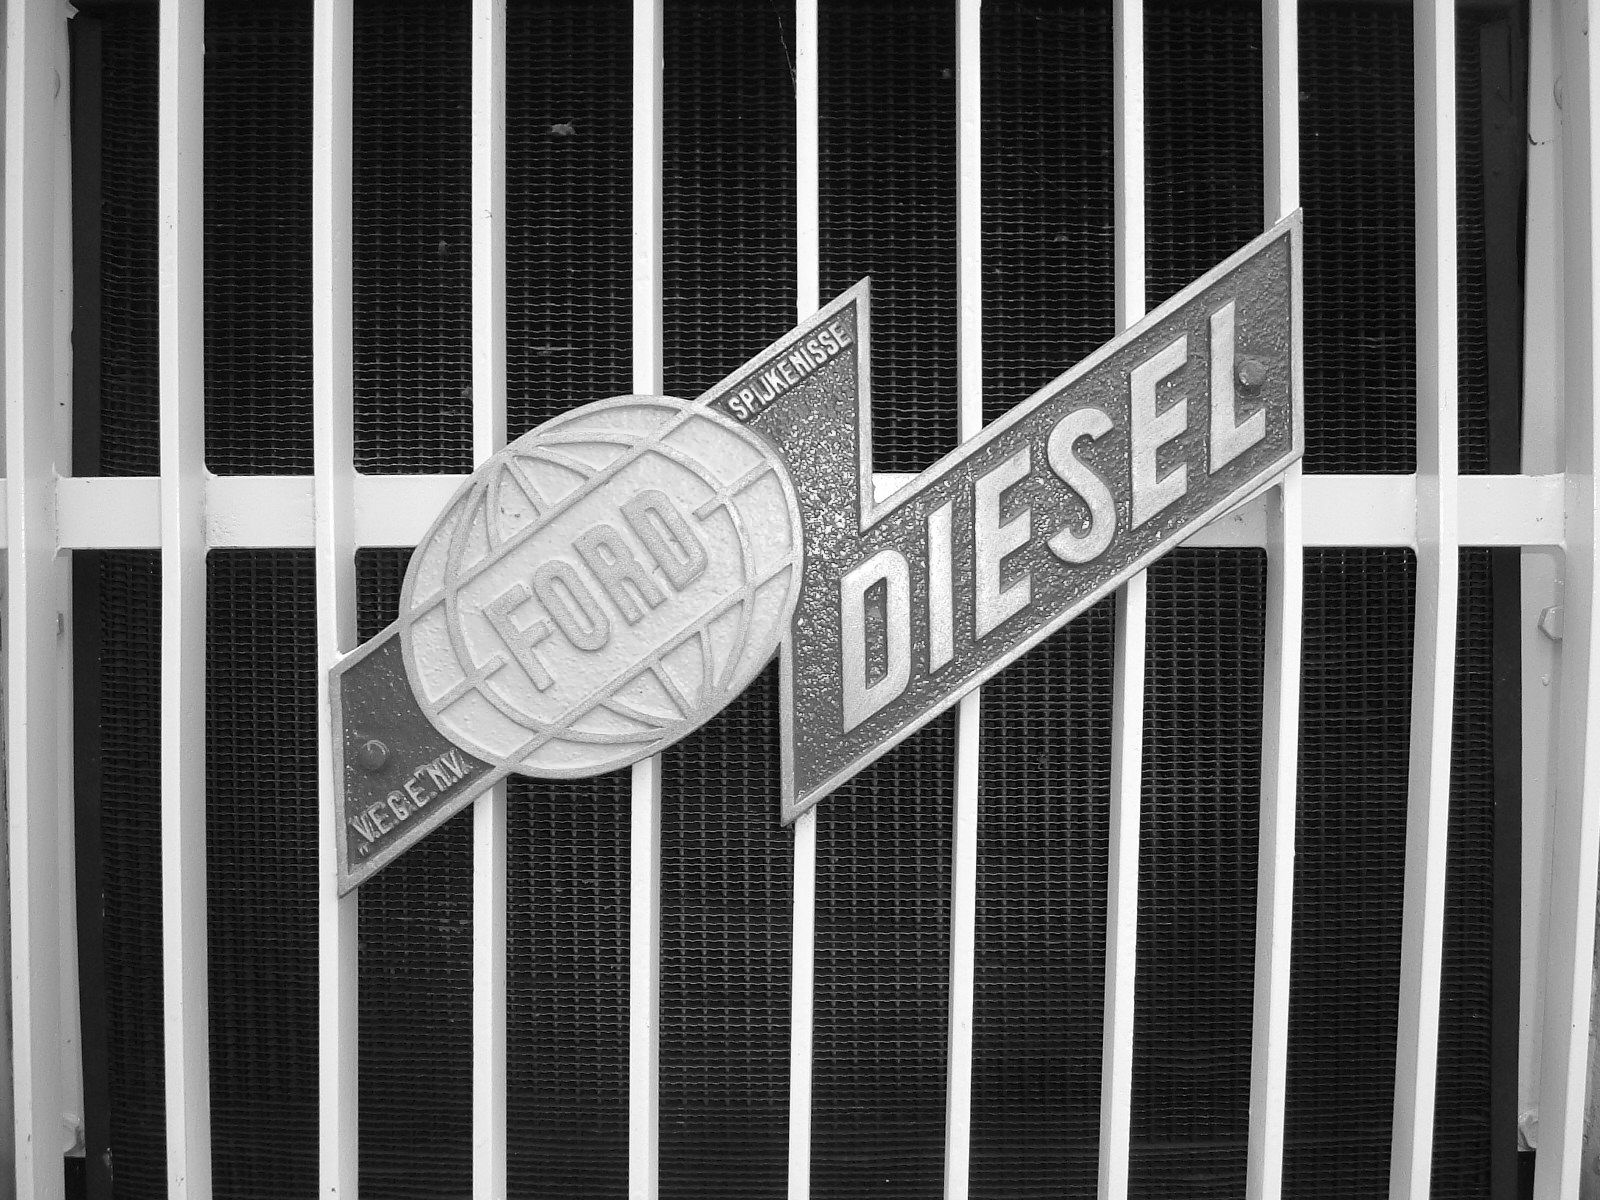 GMC with Ford diesel logo